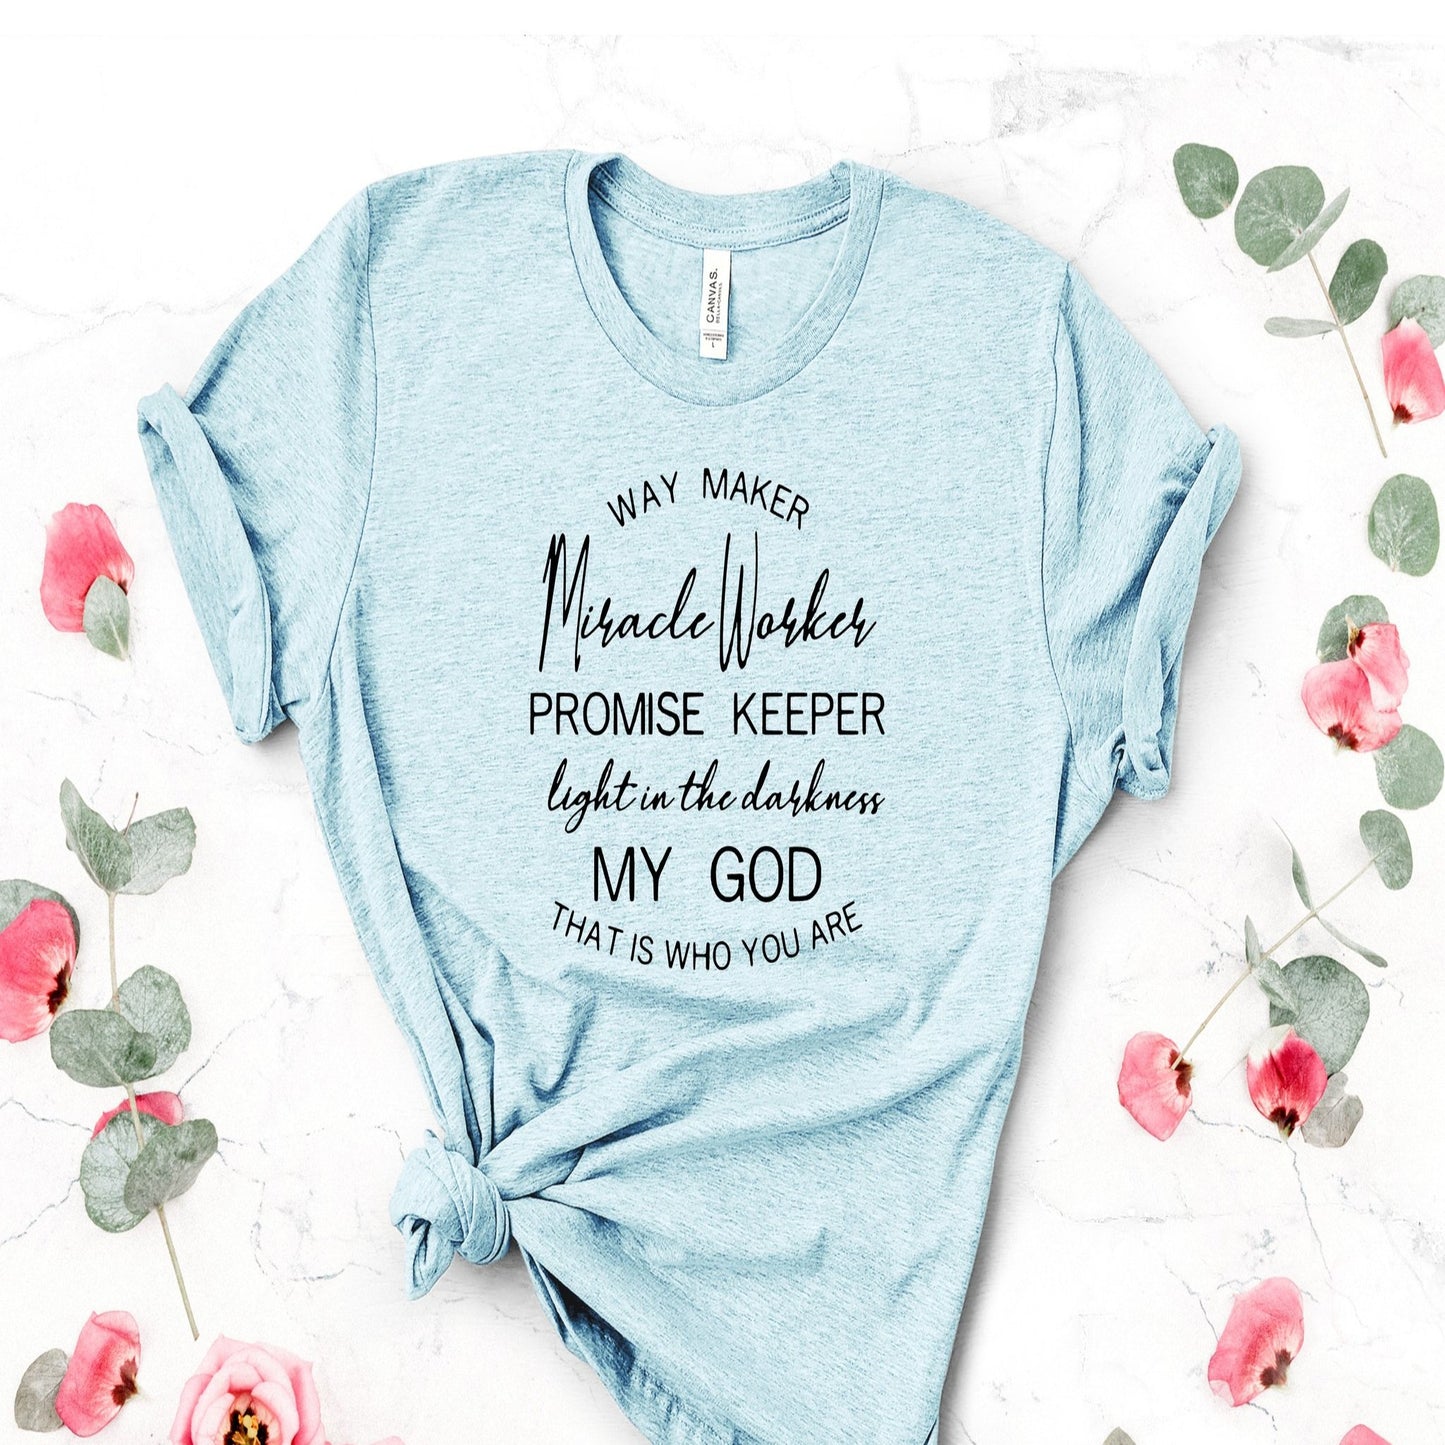 way_maker_miracle_worker_promise_keeper light God specialty tee christian shirt everyday wear 